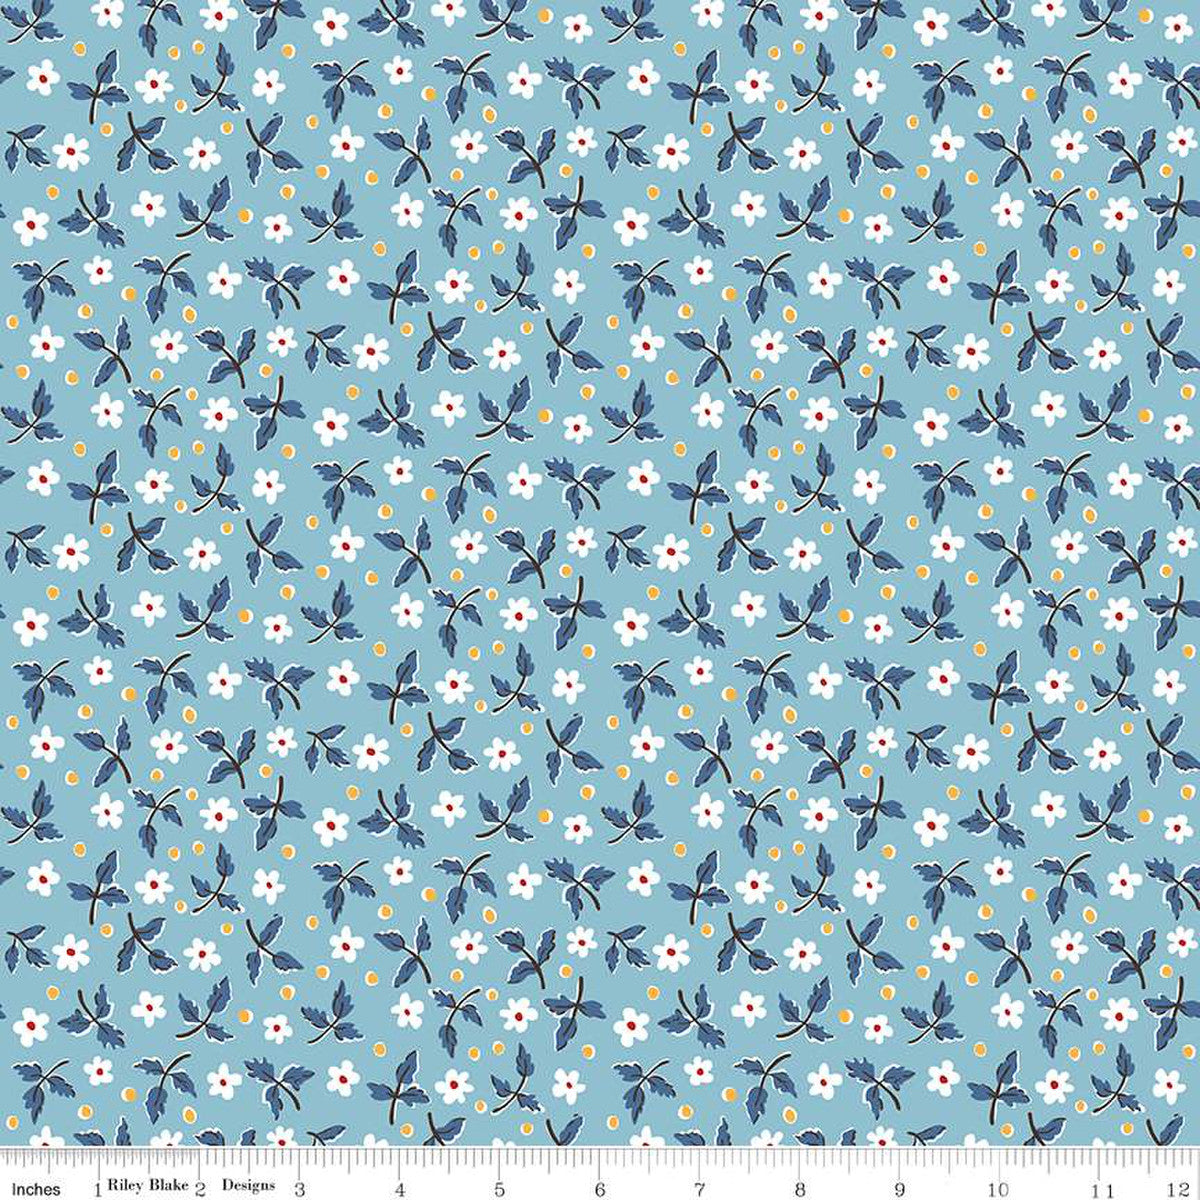 Blue and Gray Camouflage - Blue Cotton Fabric by Riley Blake